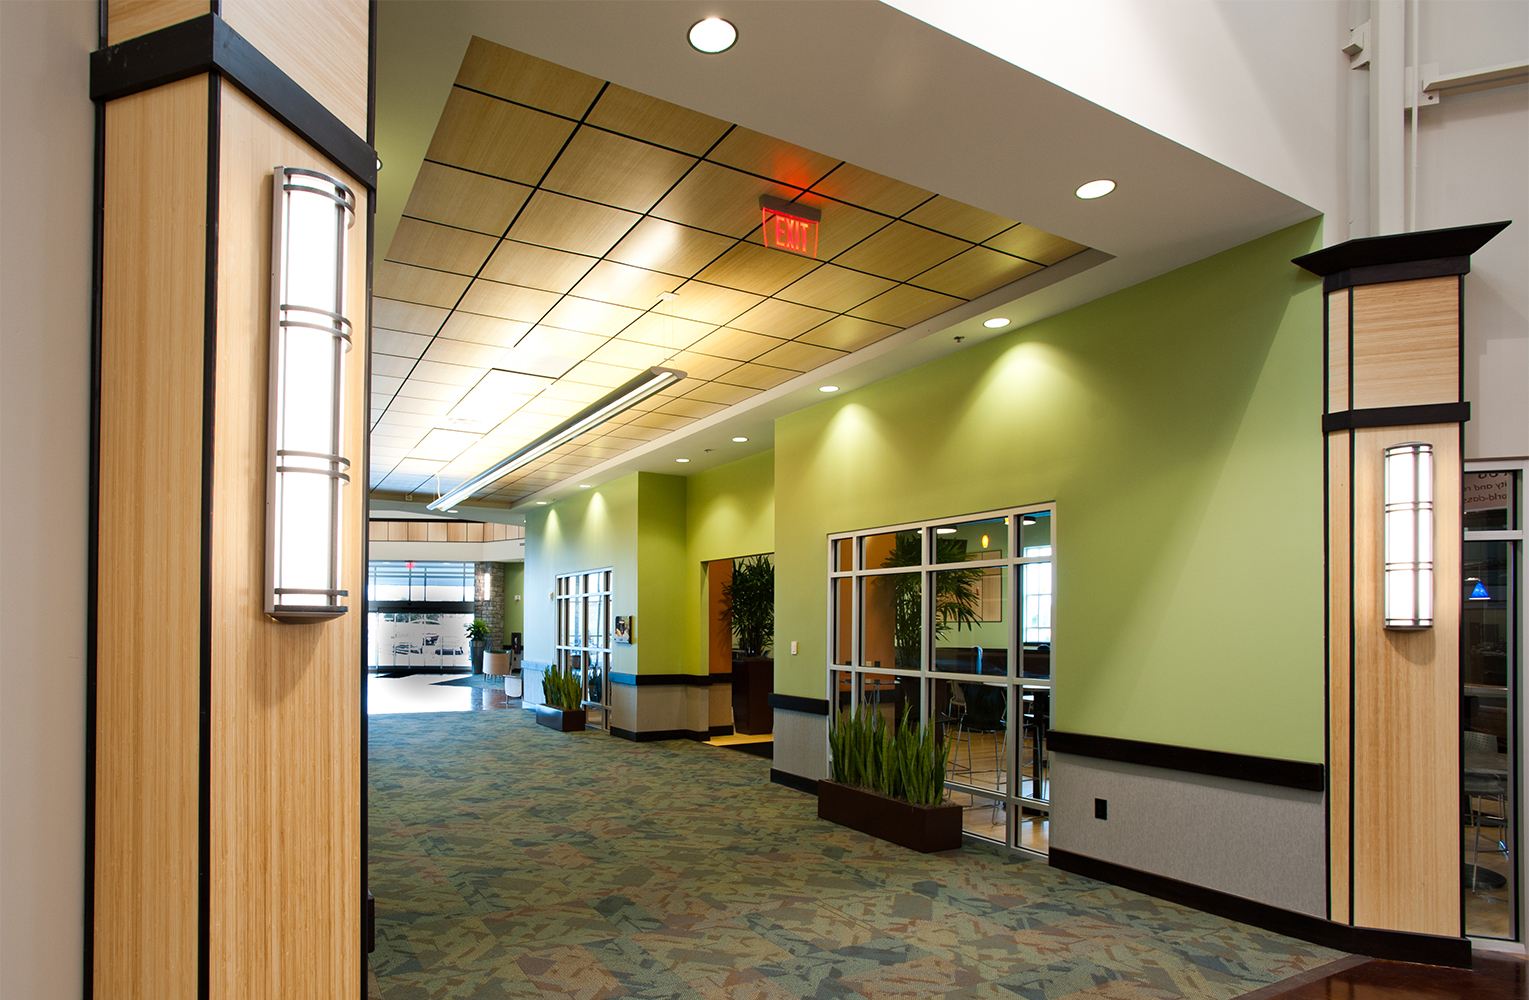 Avatar indoor wall sconces with bar accents are shown here in a modern hospital lighting design.